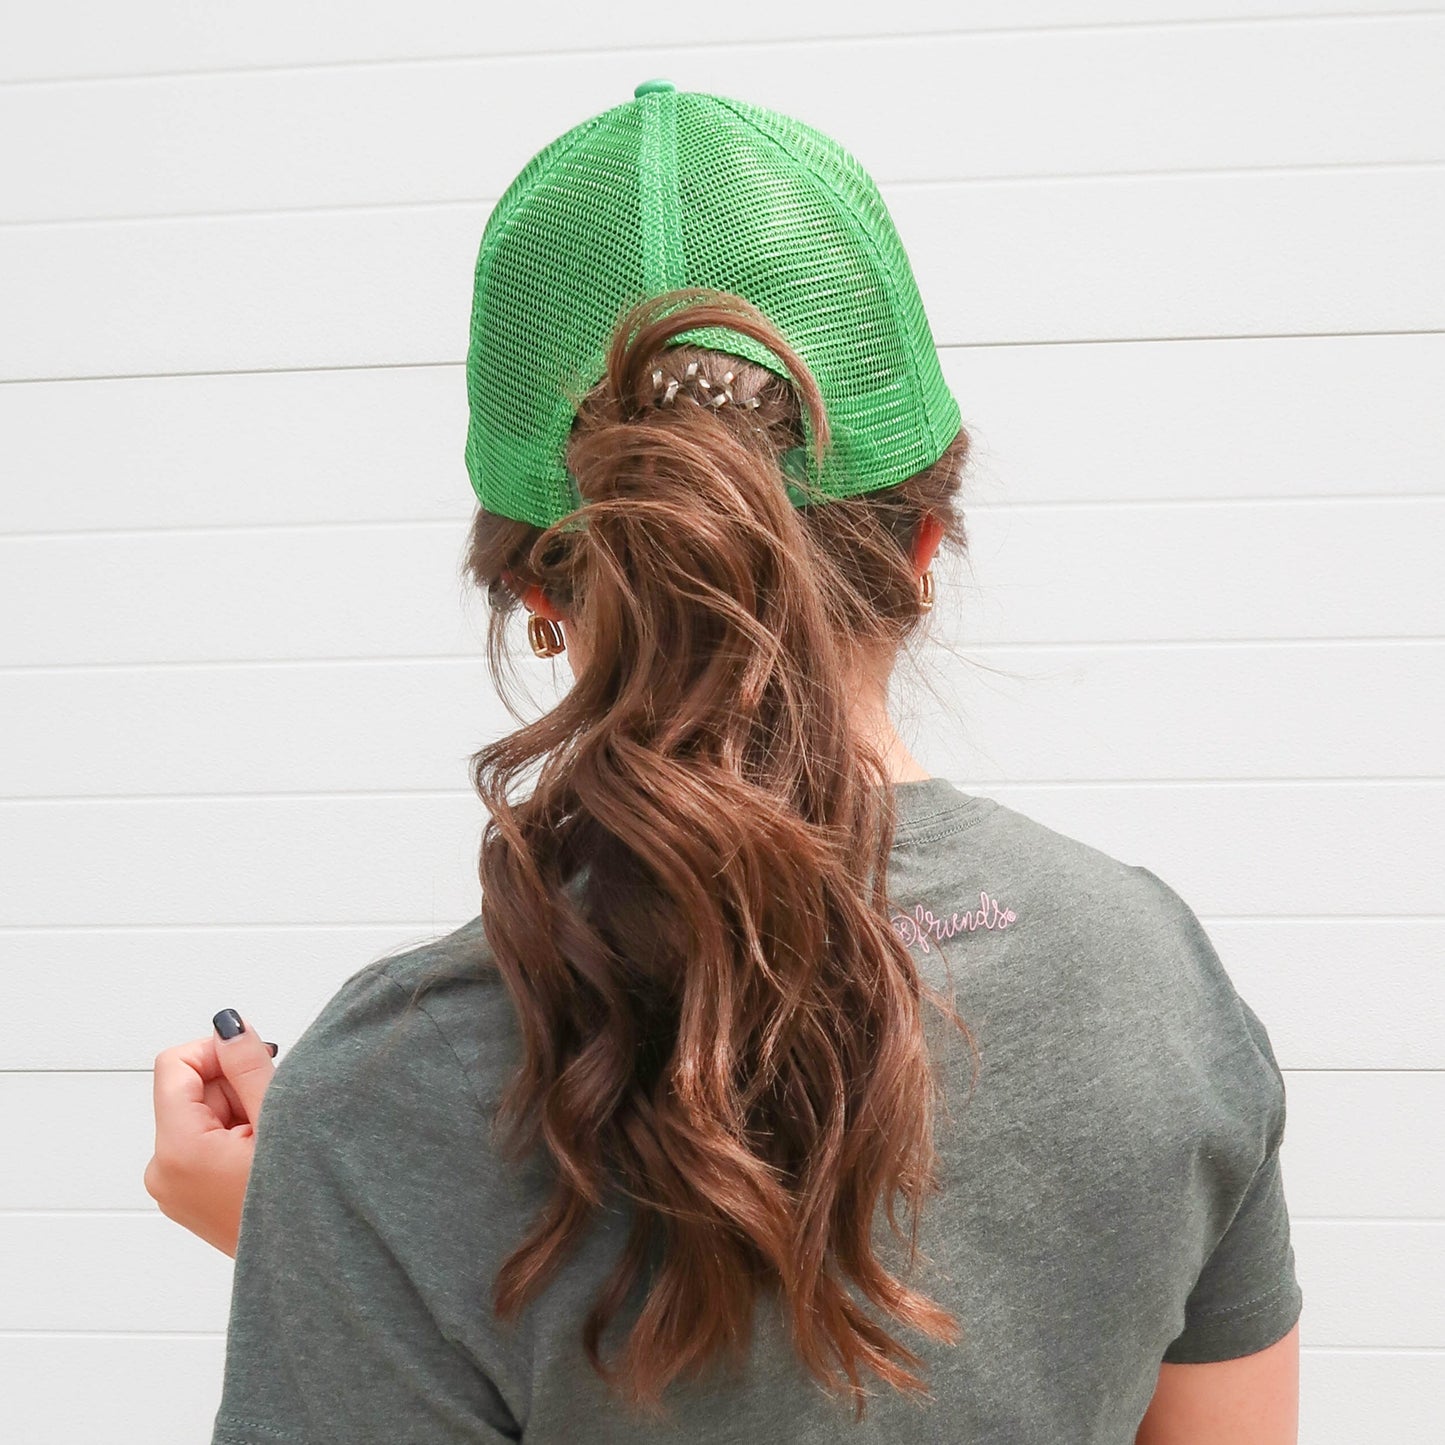 Today Is a Gift Trucker Hat - Green